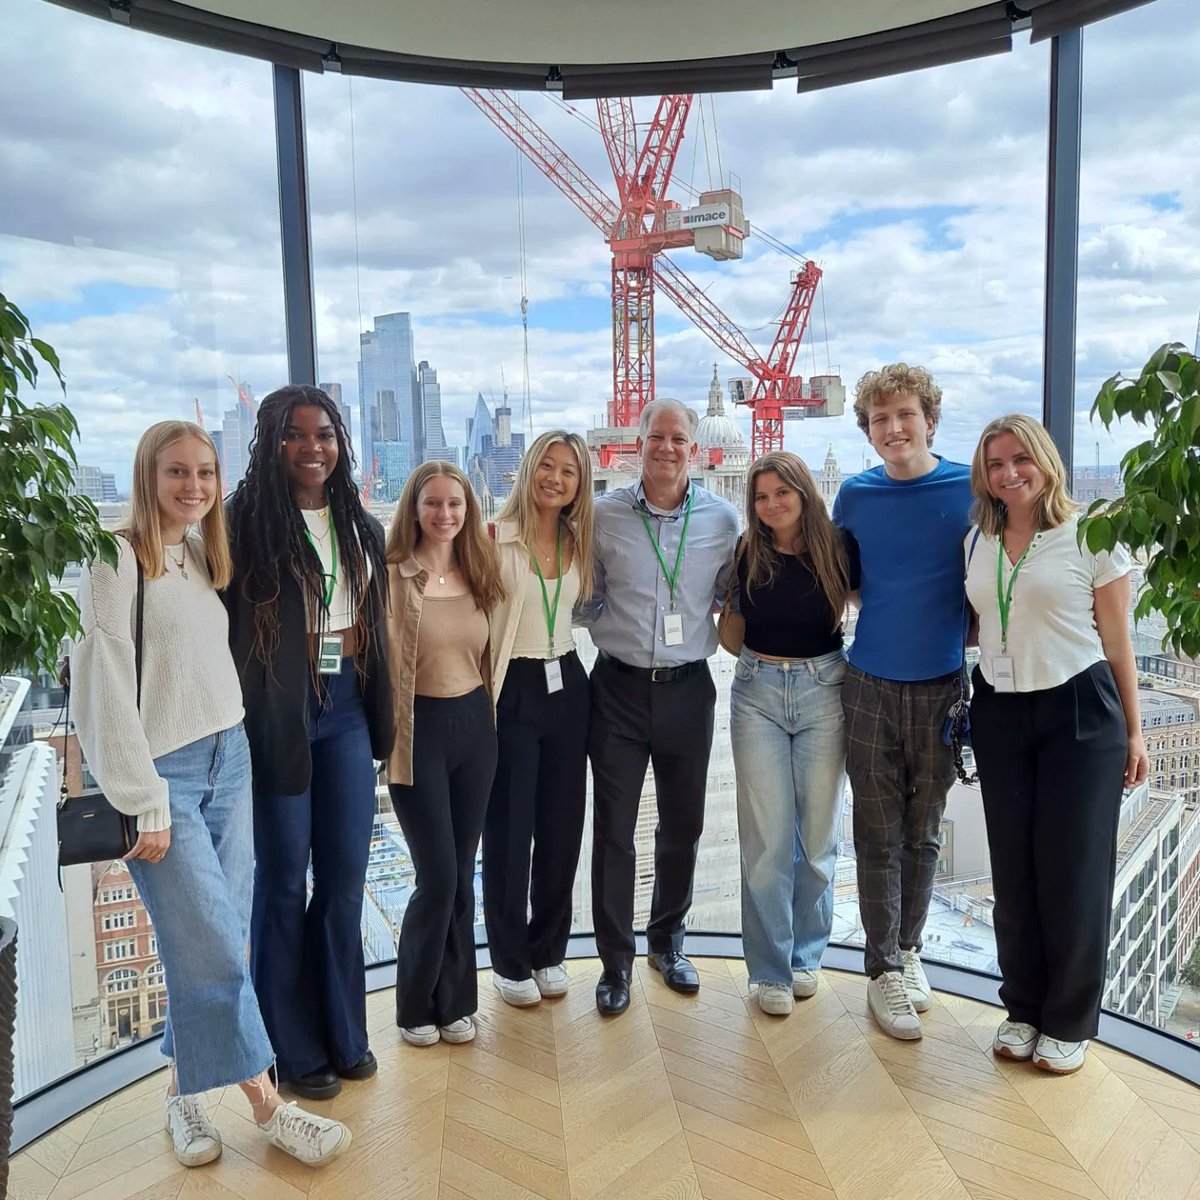 Visiting with the Deloitte team discussing the Future of Work was a perfect way to end the summer session in London. Thank you to Ed Walker, Sam Shindler-Glass, and Paige Kane for arranging and facilitating the student experience. @fsubiz @fsulondon @fsuip @deloitte_uk @Deloitte